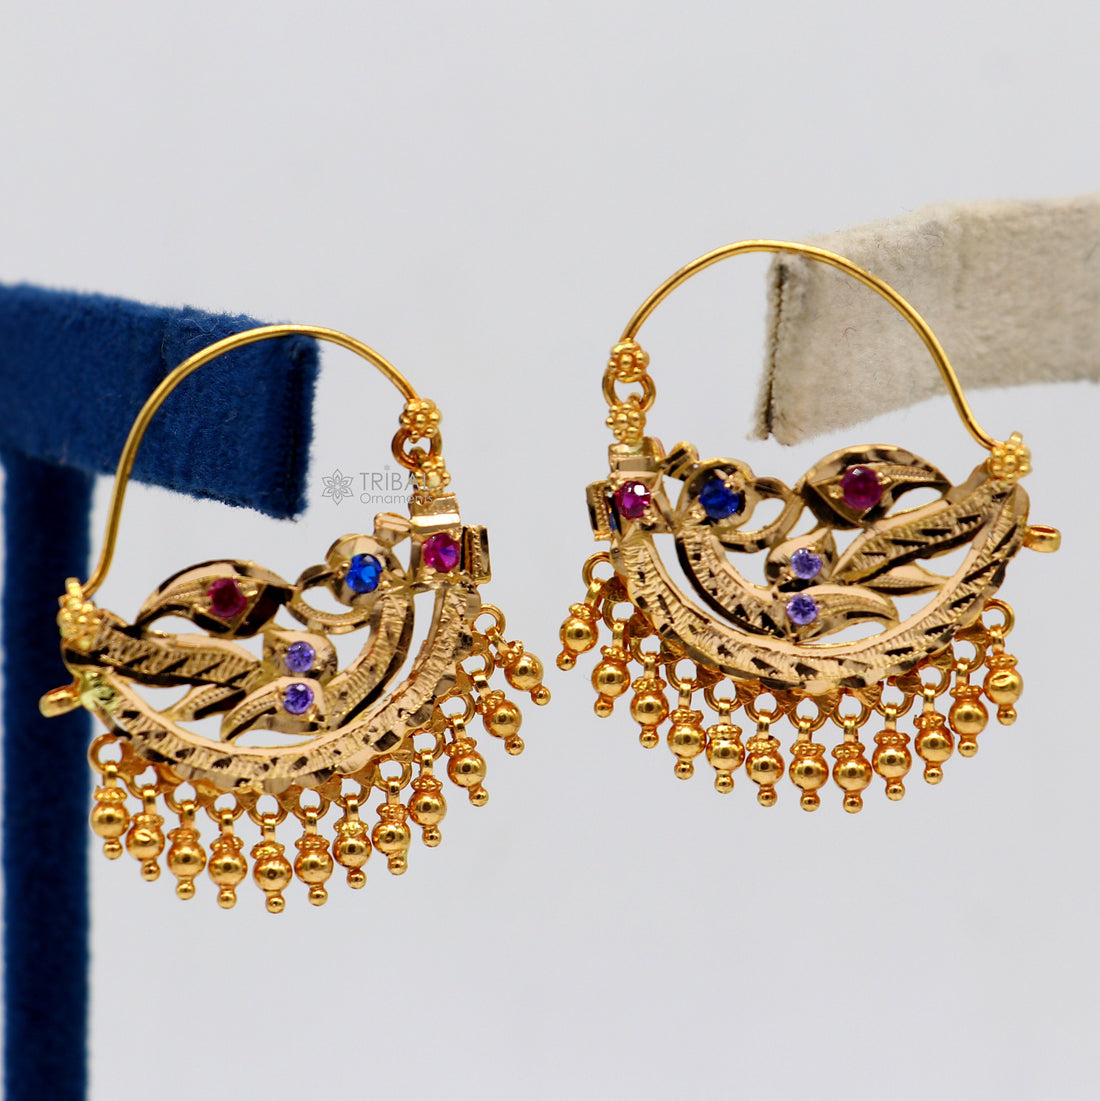 Indian traditional cultural design 22Kt yellow gold handmade amazing antique style girl's women's earrings charms hoops jewelry er183 - TRIBAL ORNAMENTS